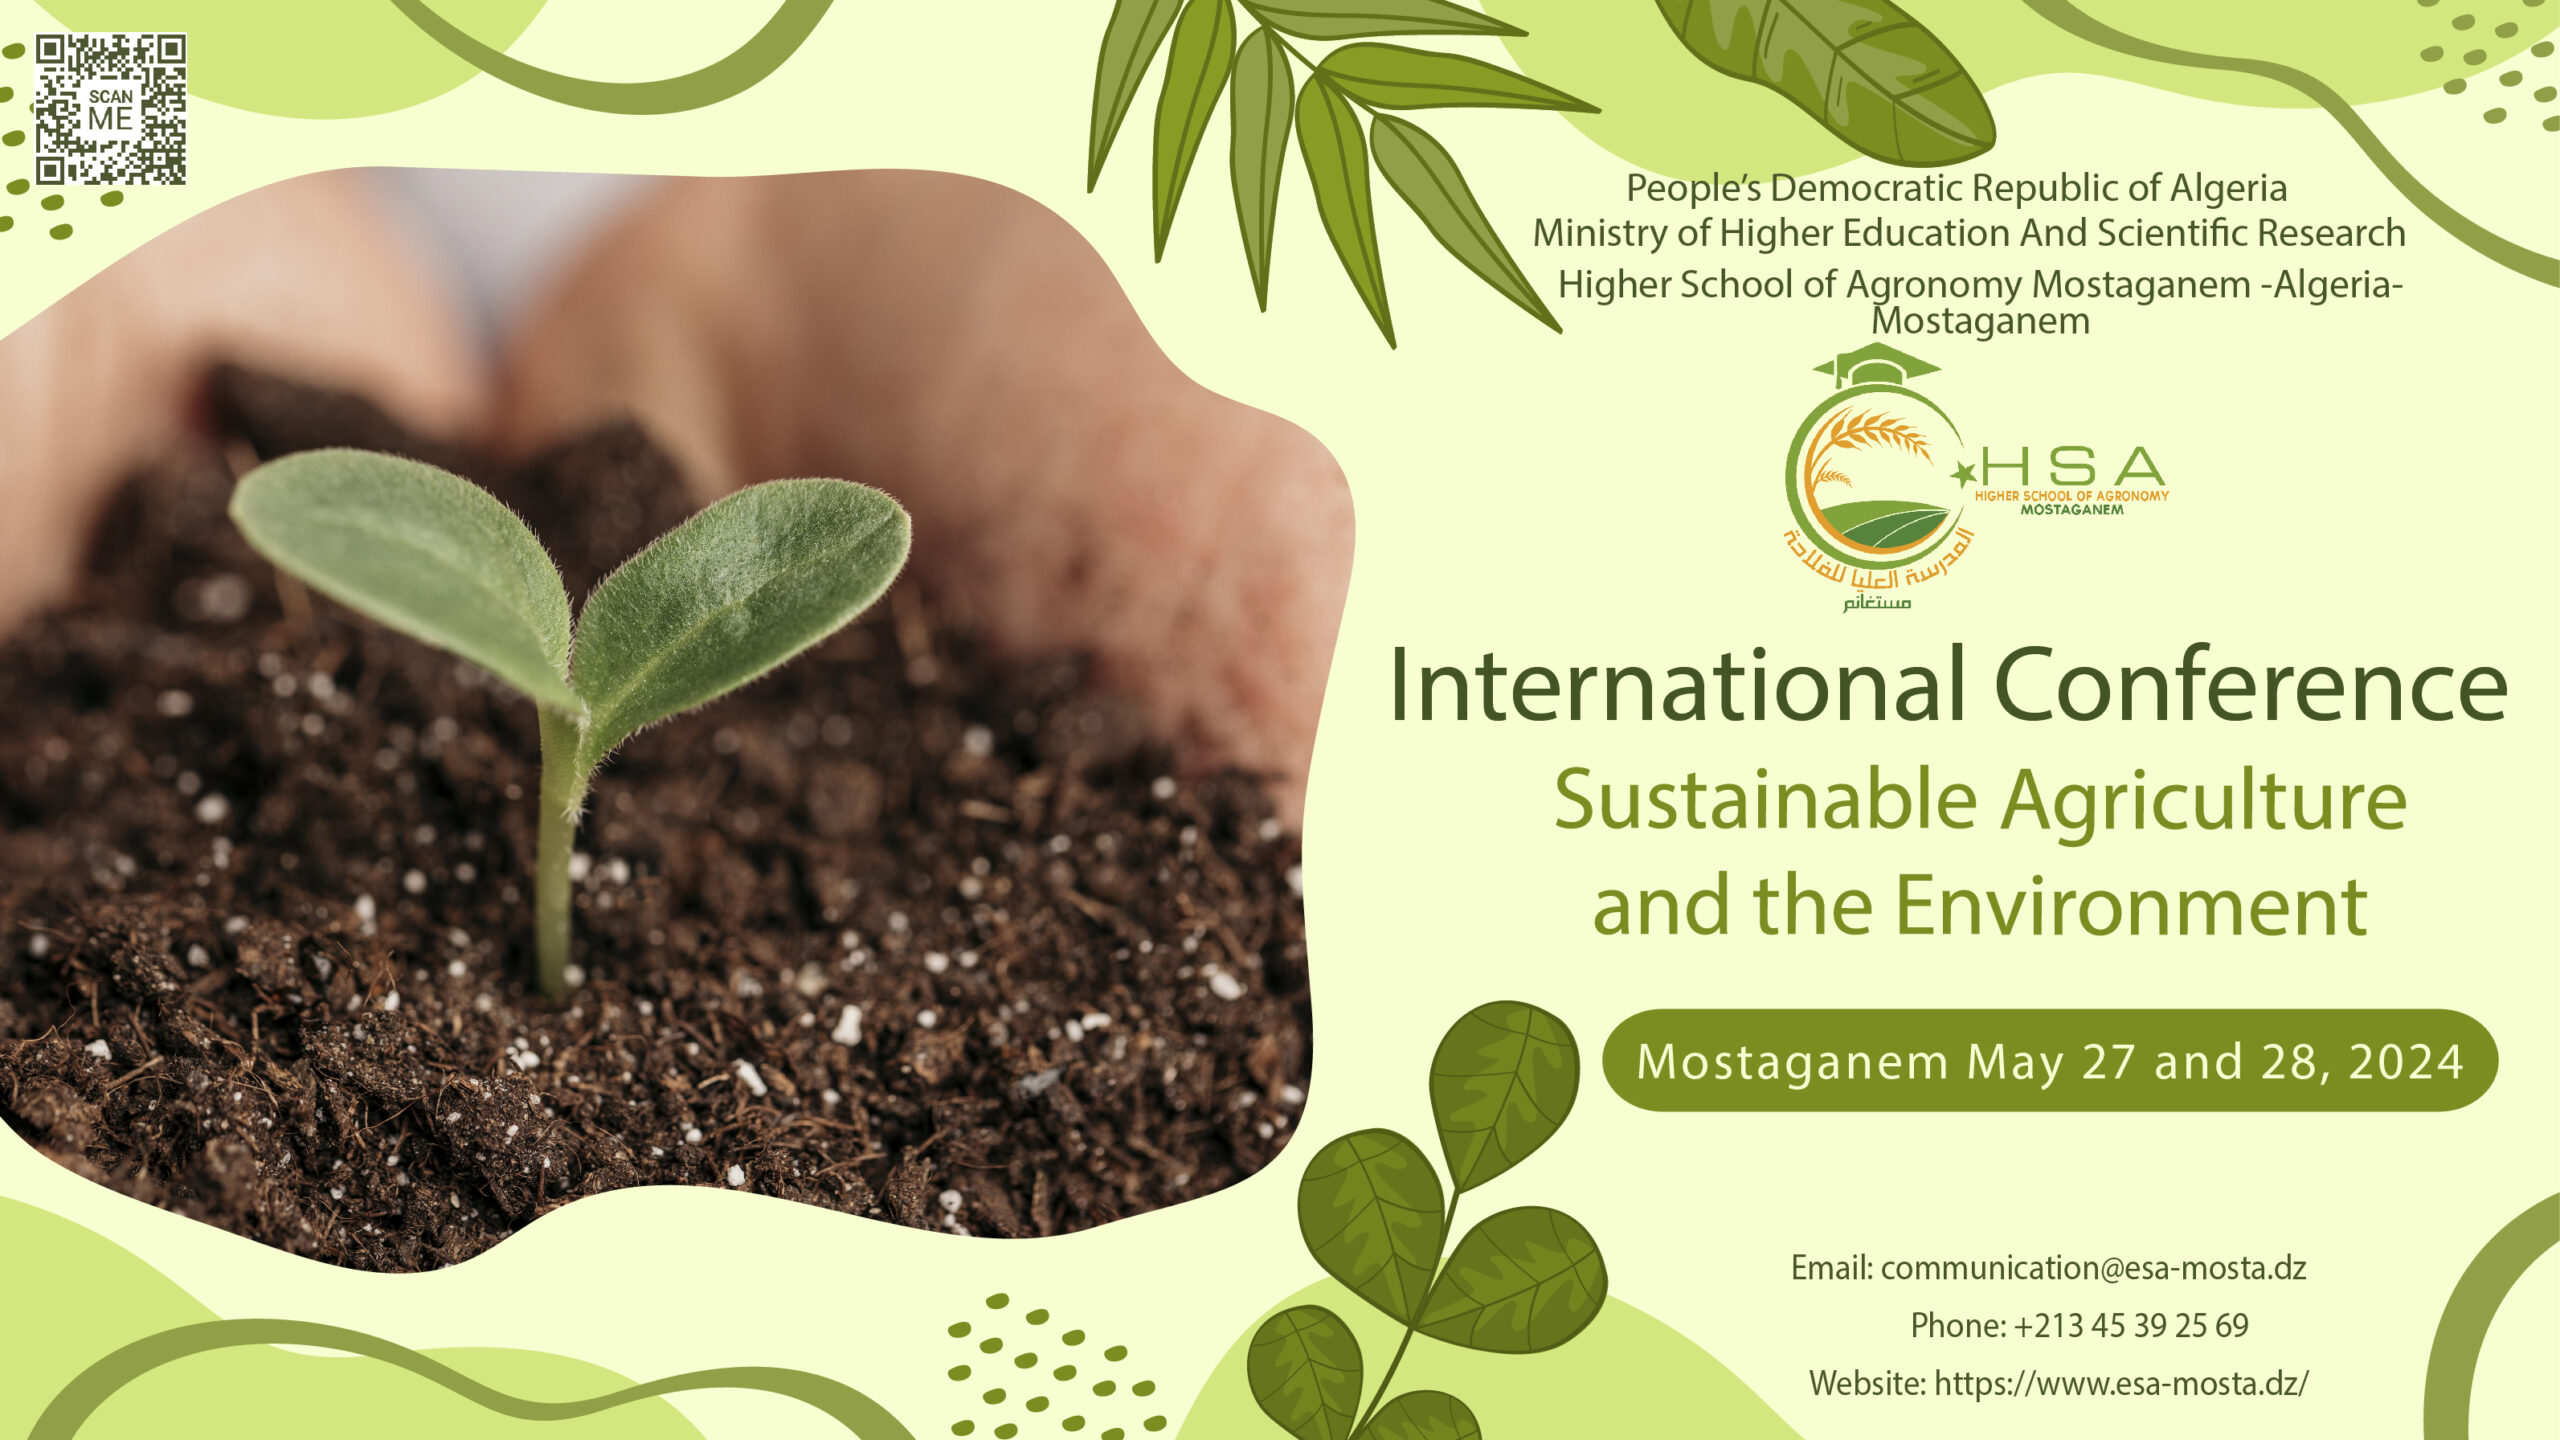 International Conference Sustainable Agriculture and the Environment HSAM